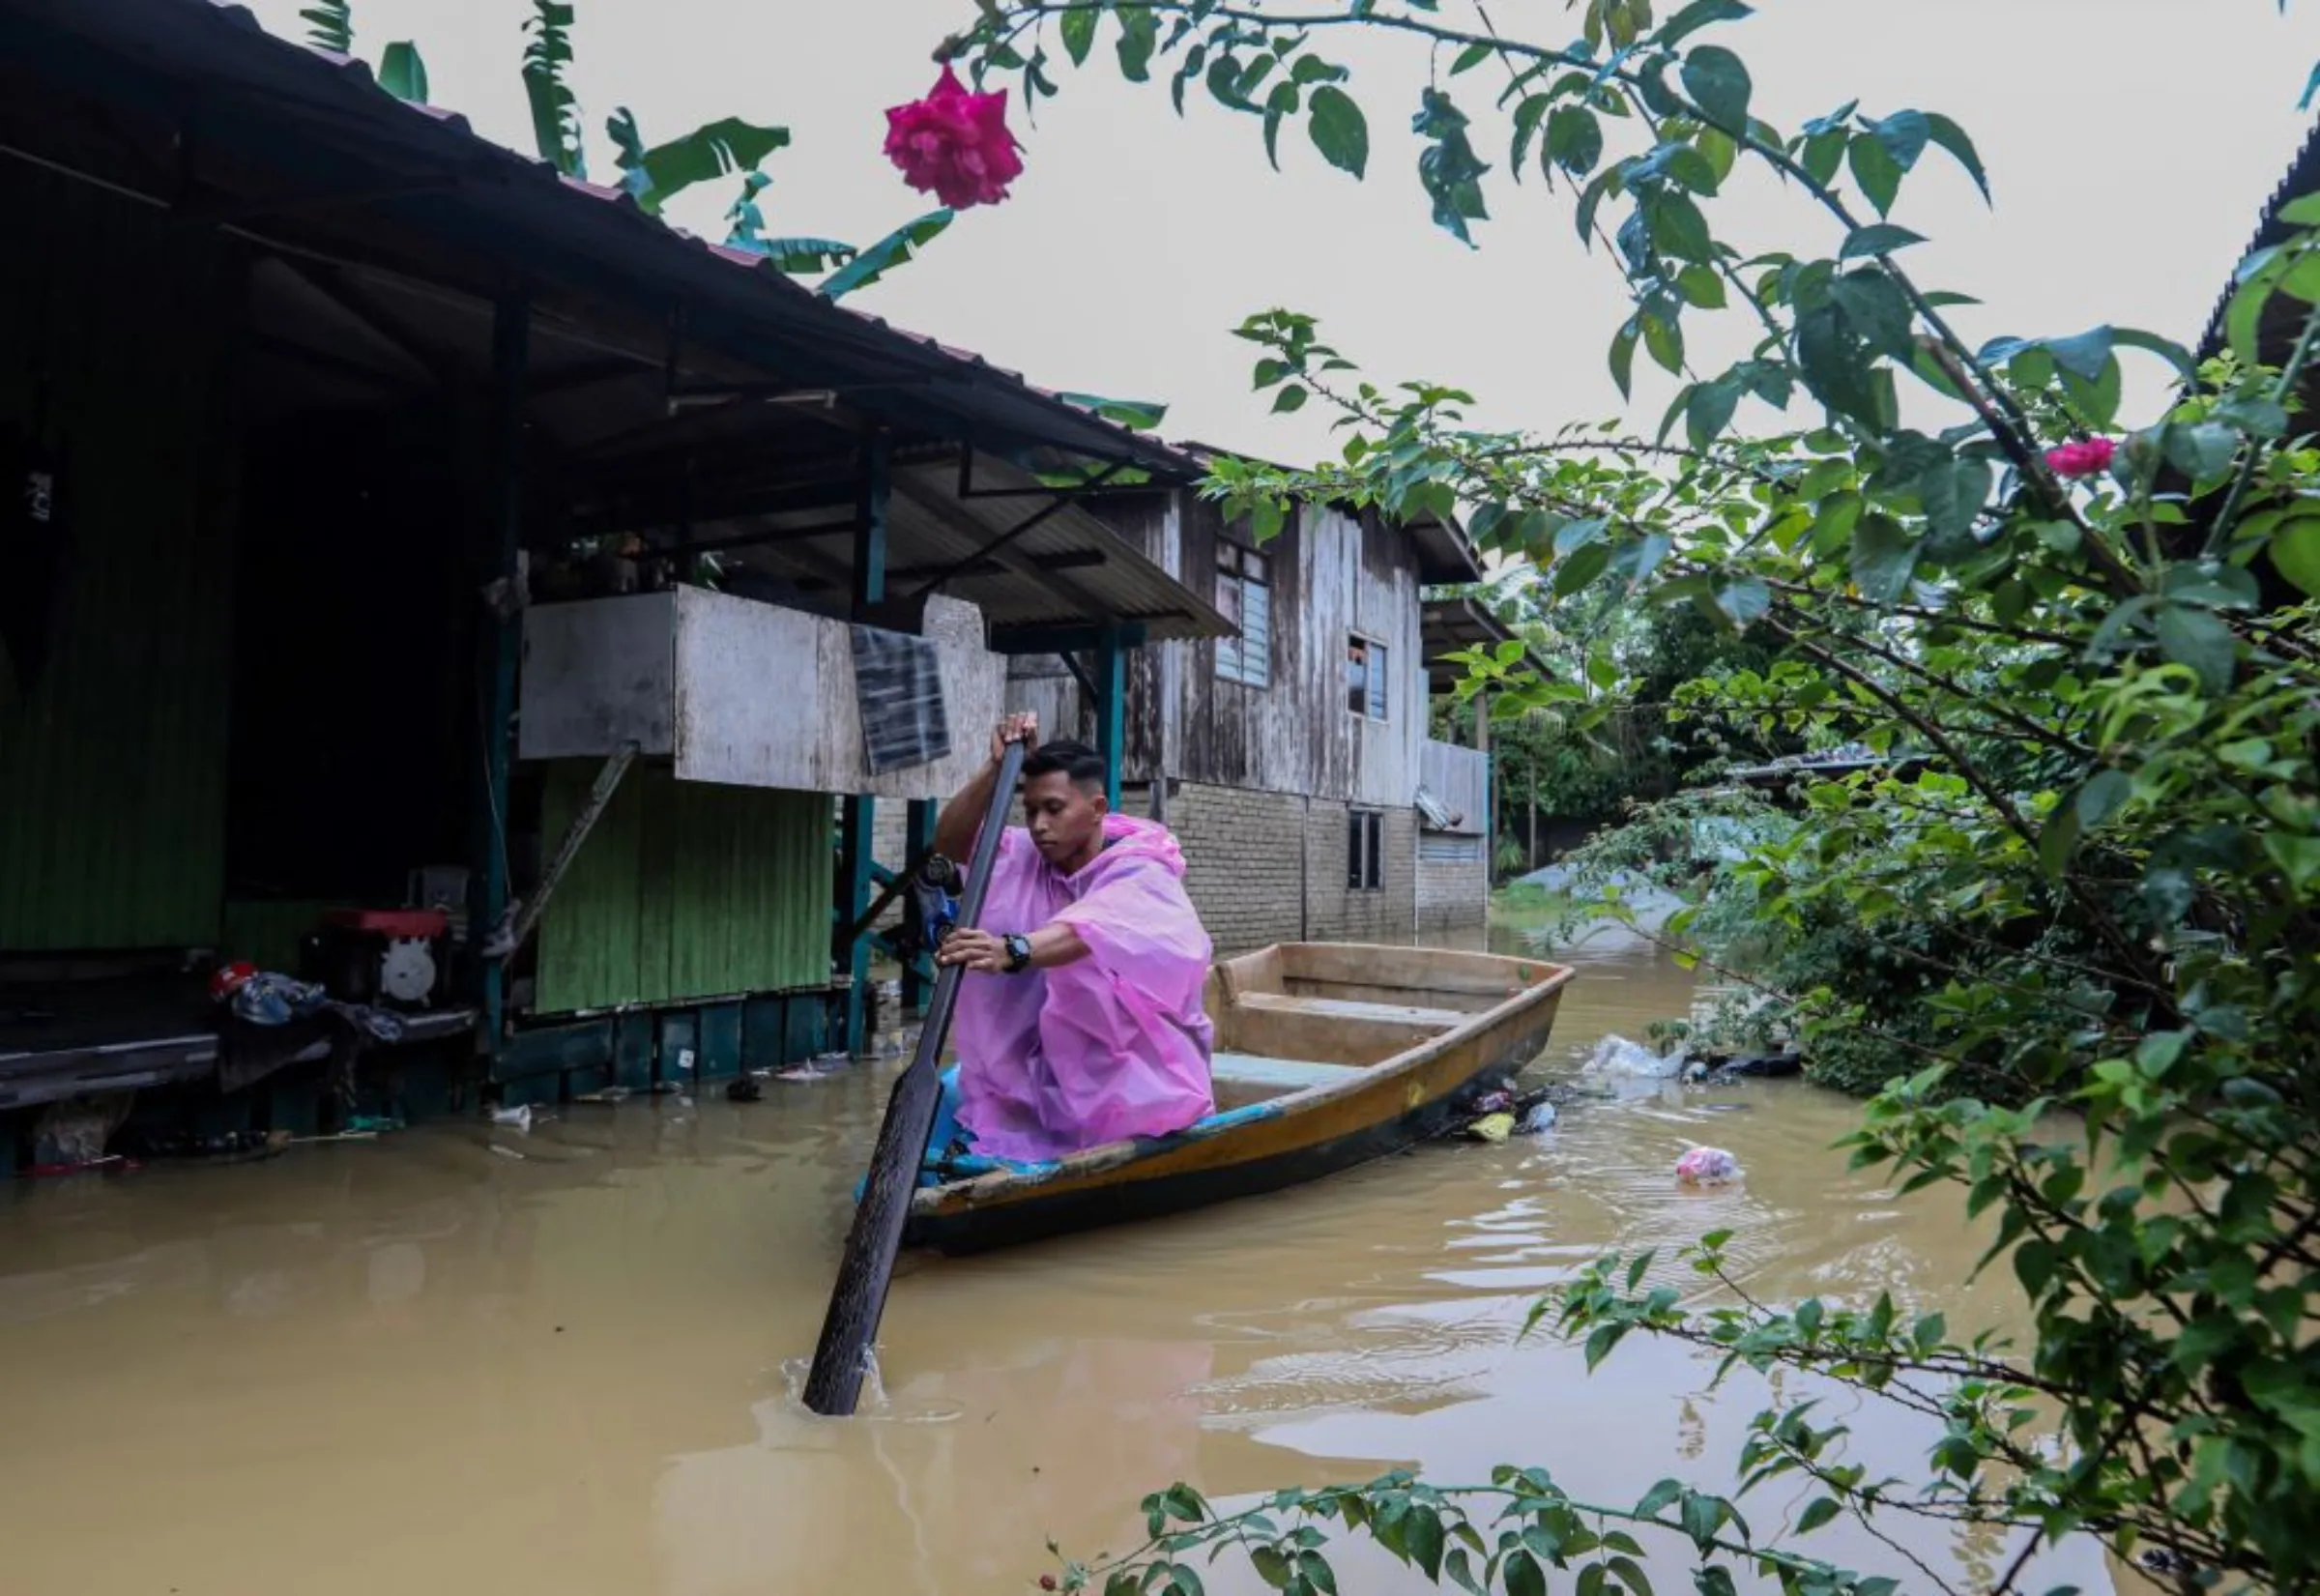 A man paddles a boat passing by a partially submerged house by flood water in Kuala Terengganu, Terengganu, Malaysia December 21, 2022. More than 70000 were forced into relief centres, with numbers rising in Kelantan, Terengganu and Pahang, according to local media